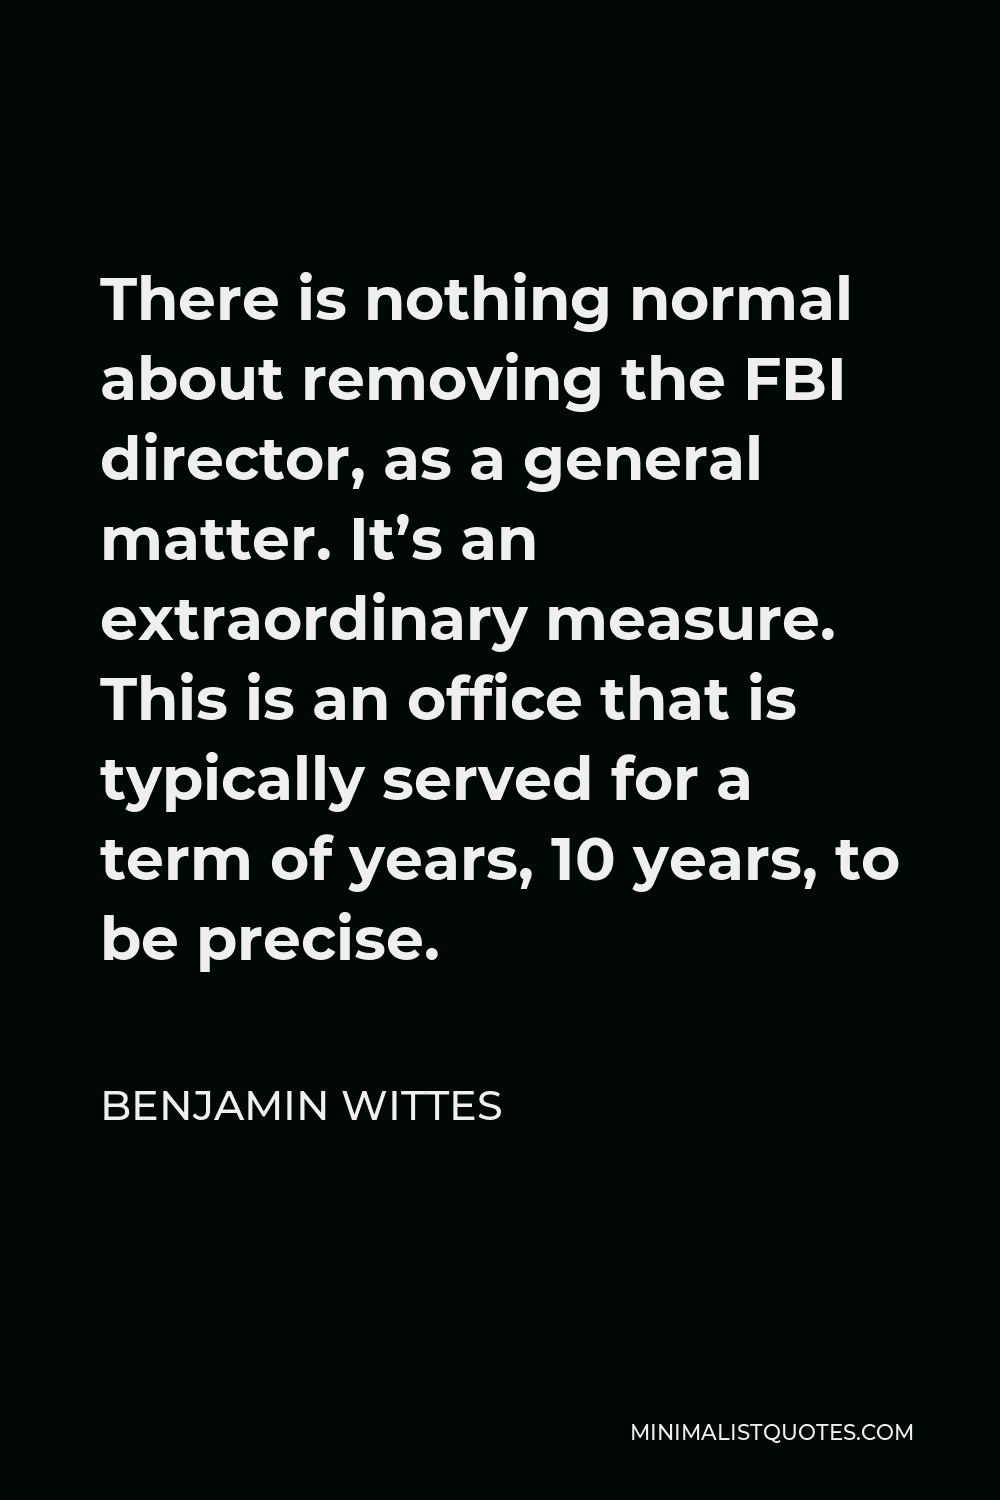 Benjamin Wittes Quote - There is nothing normal about removing the FBI director, as a general matter. It’s an extraordinary measure. This is an office that is typically served for a term of years, 10 years, to be precise.